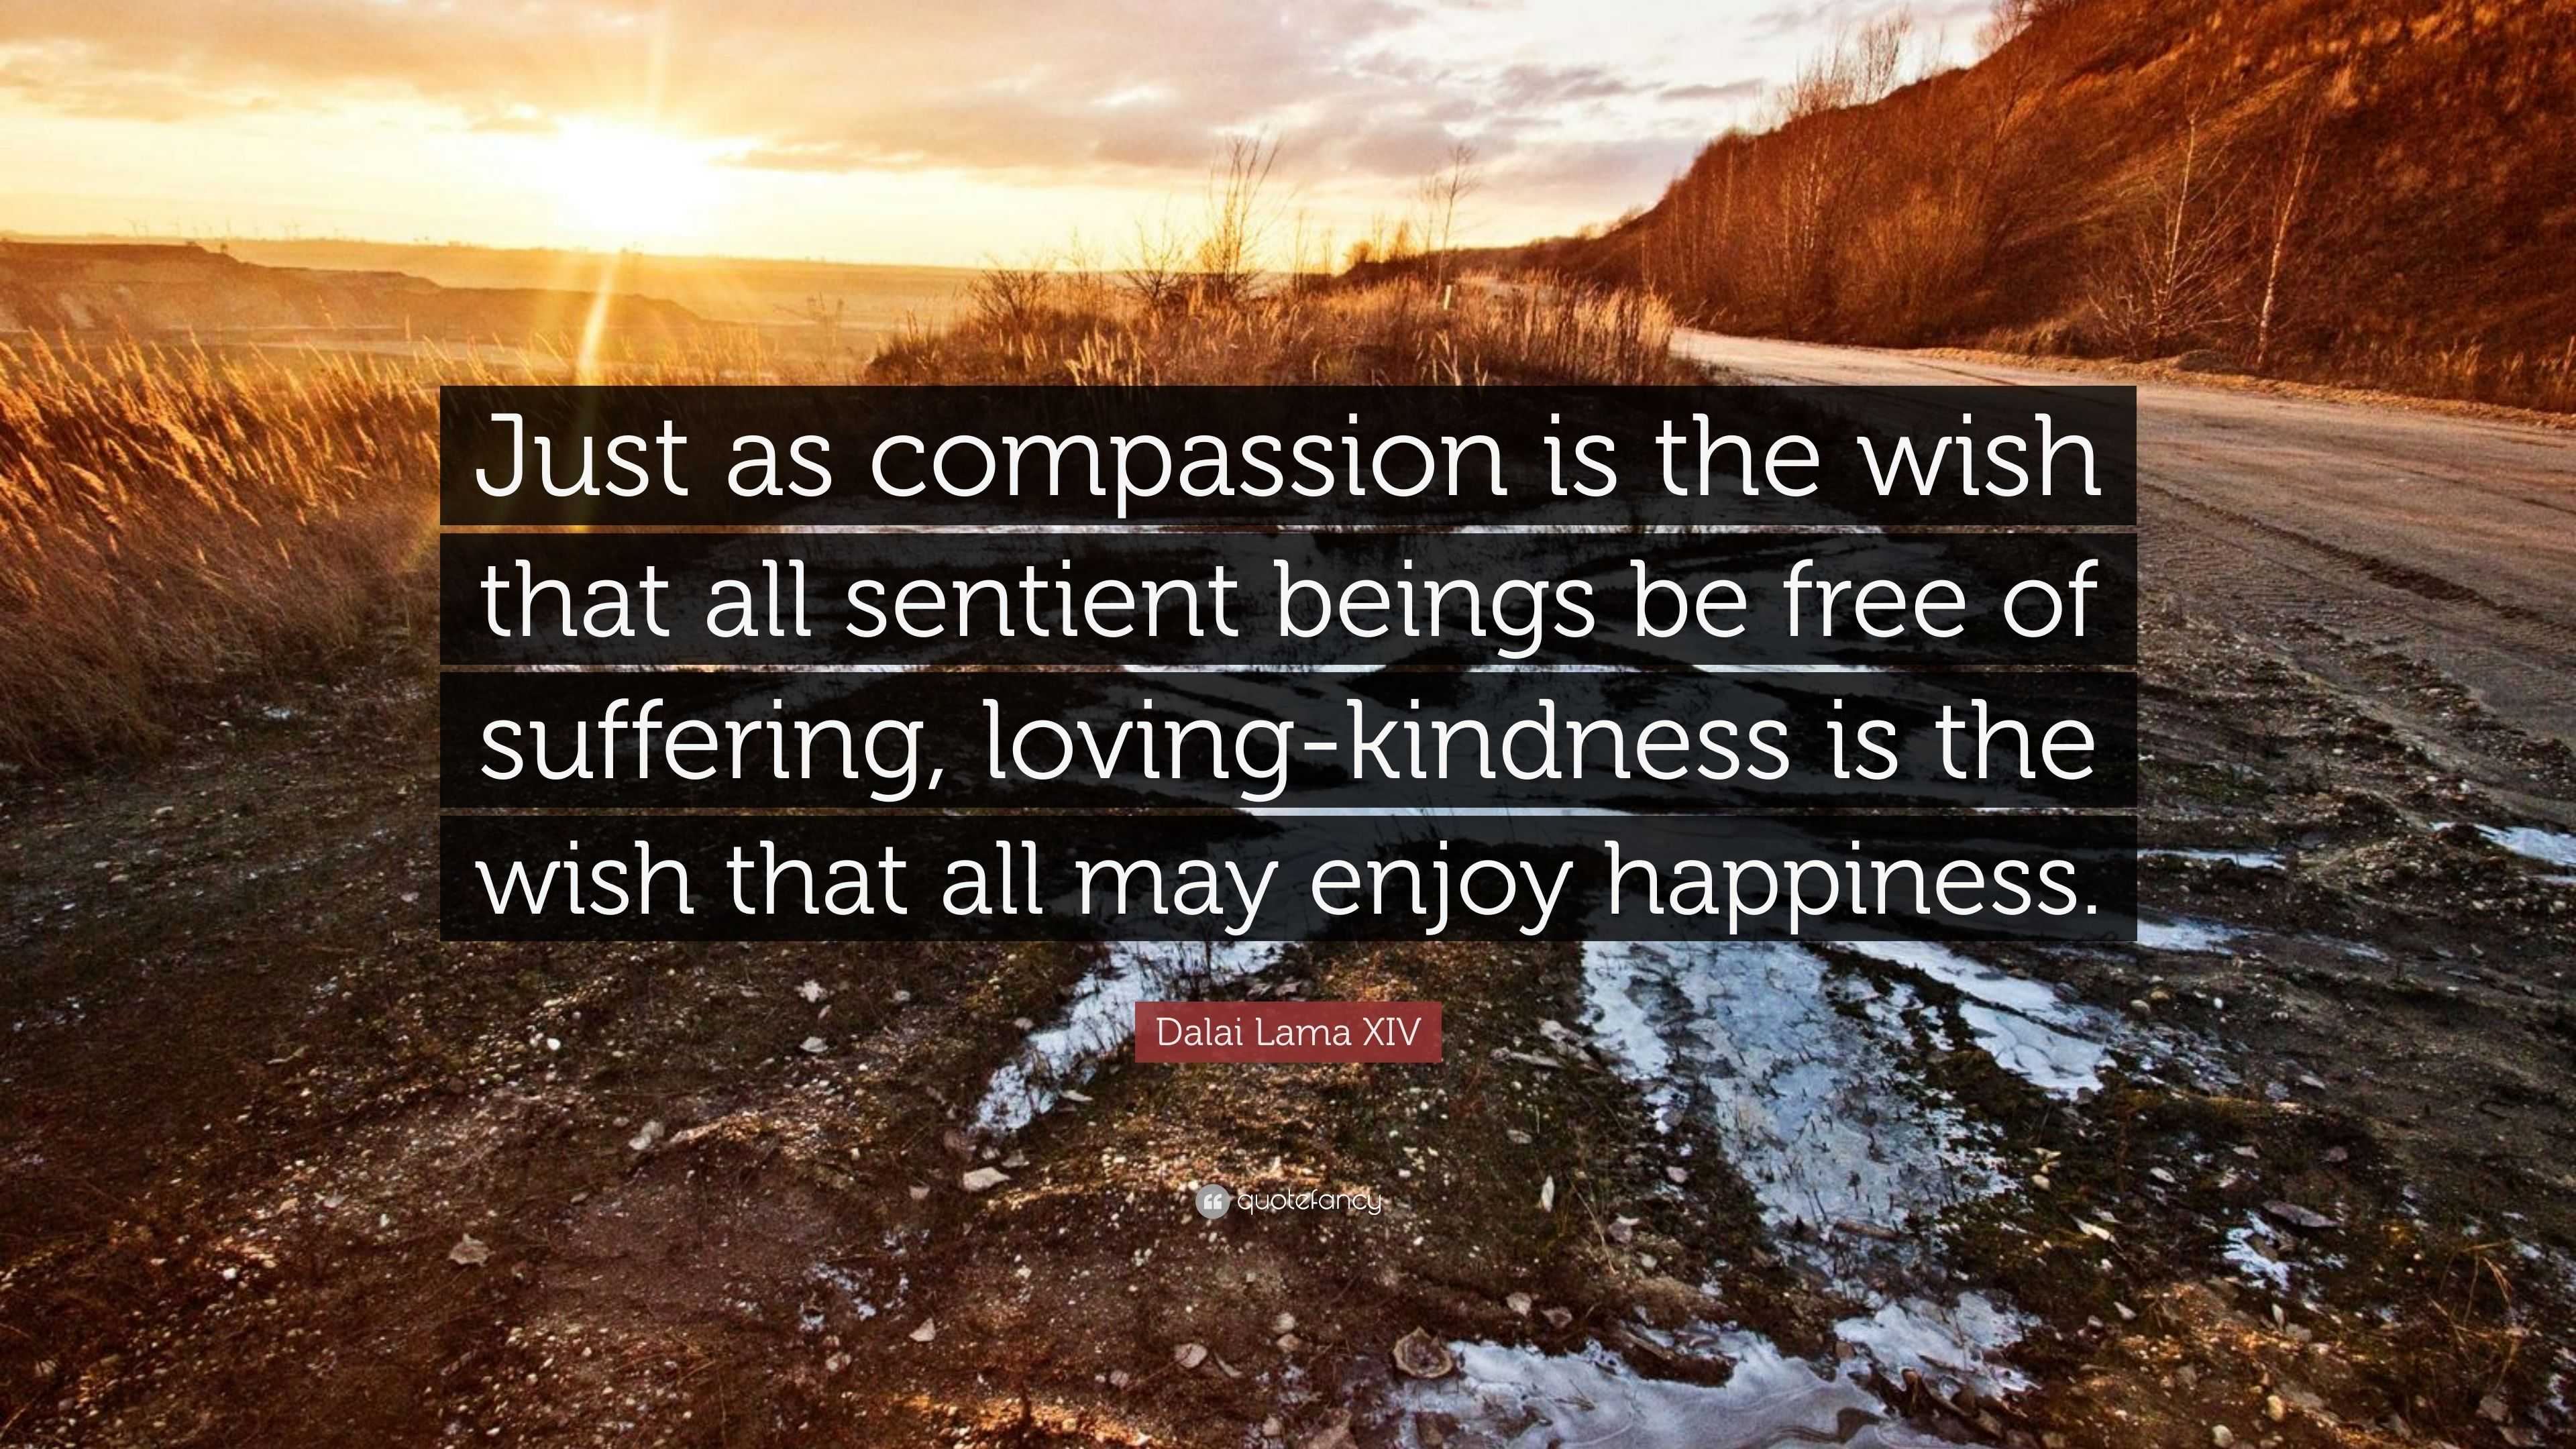 Dalai Lama XIV Quote: “Just as compassion is the wish that all sentient